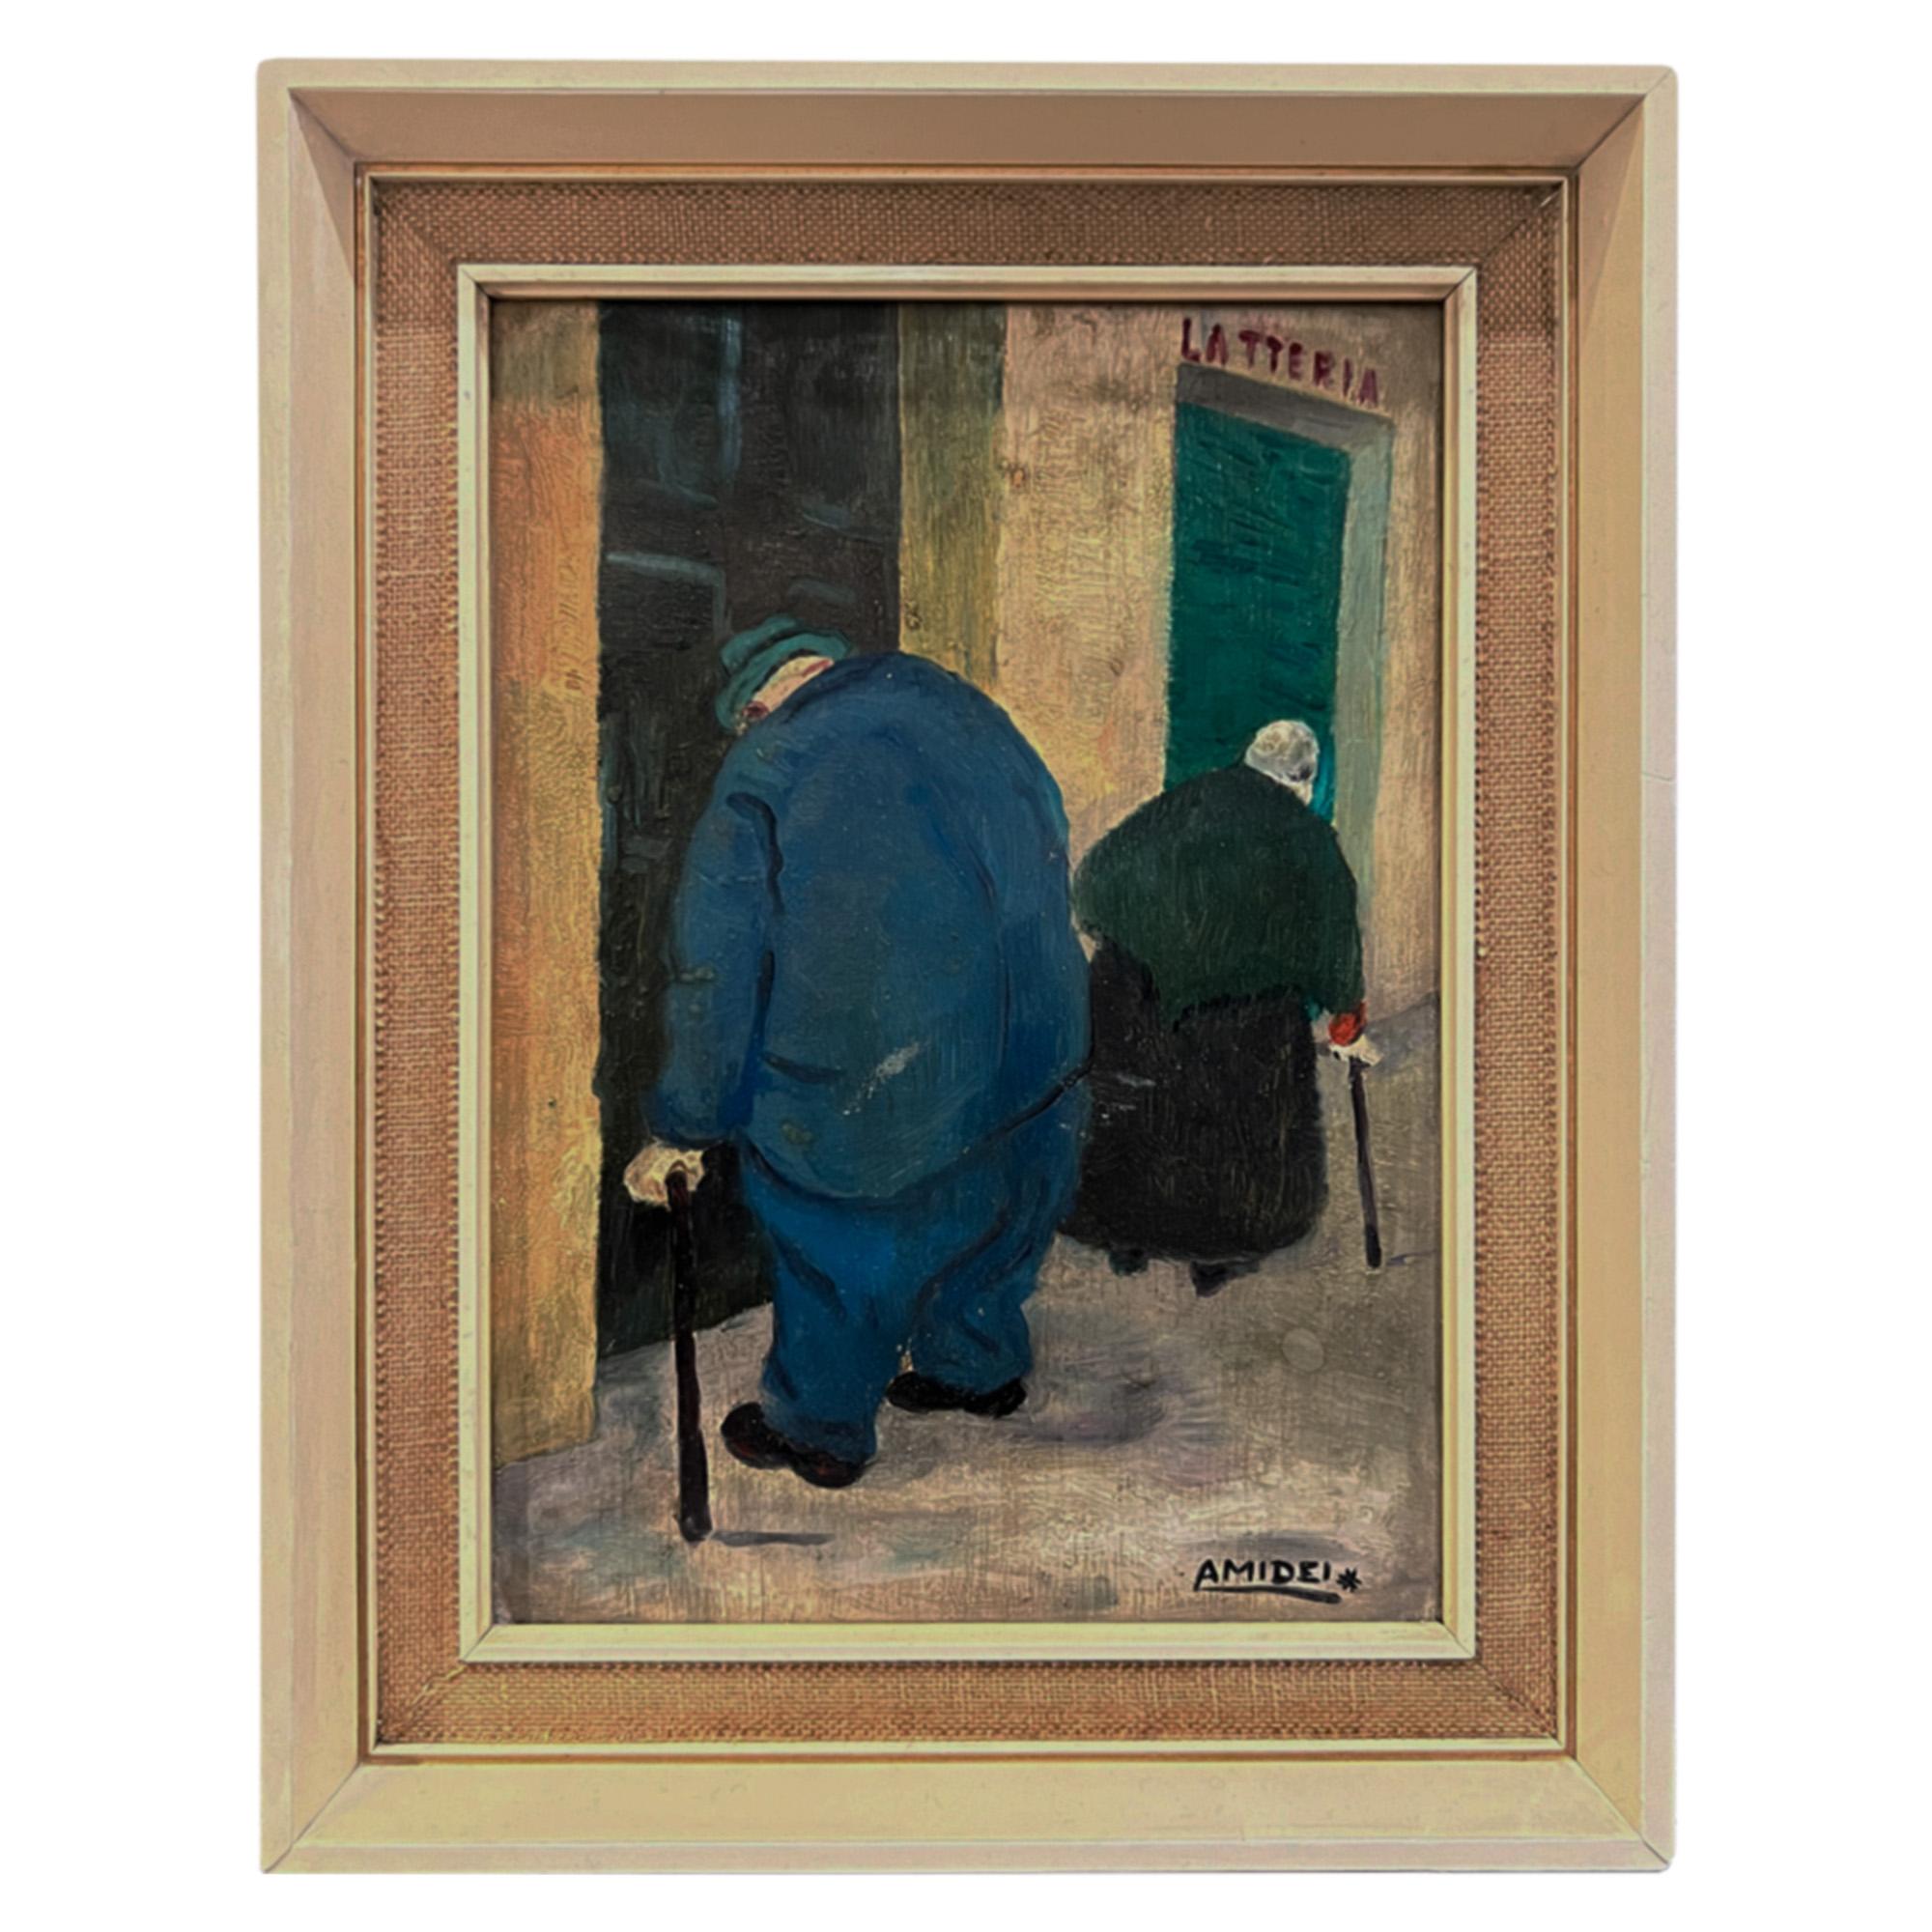 A lovely duo of small paintings by the Italian artist Franco Amidei - note how the man in the blue suit has changed a little over the years… Please take a look at all the pictures to see the details and colours.

Charming mid century, decorative